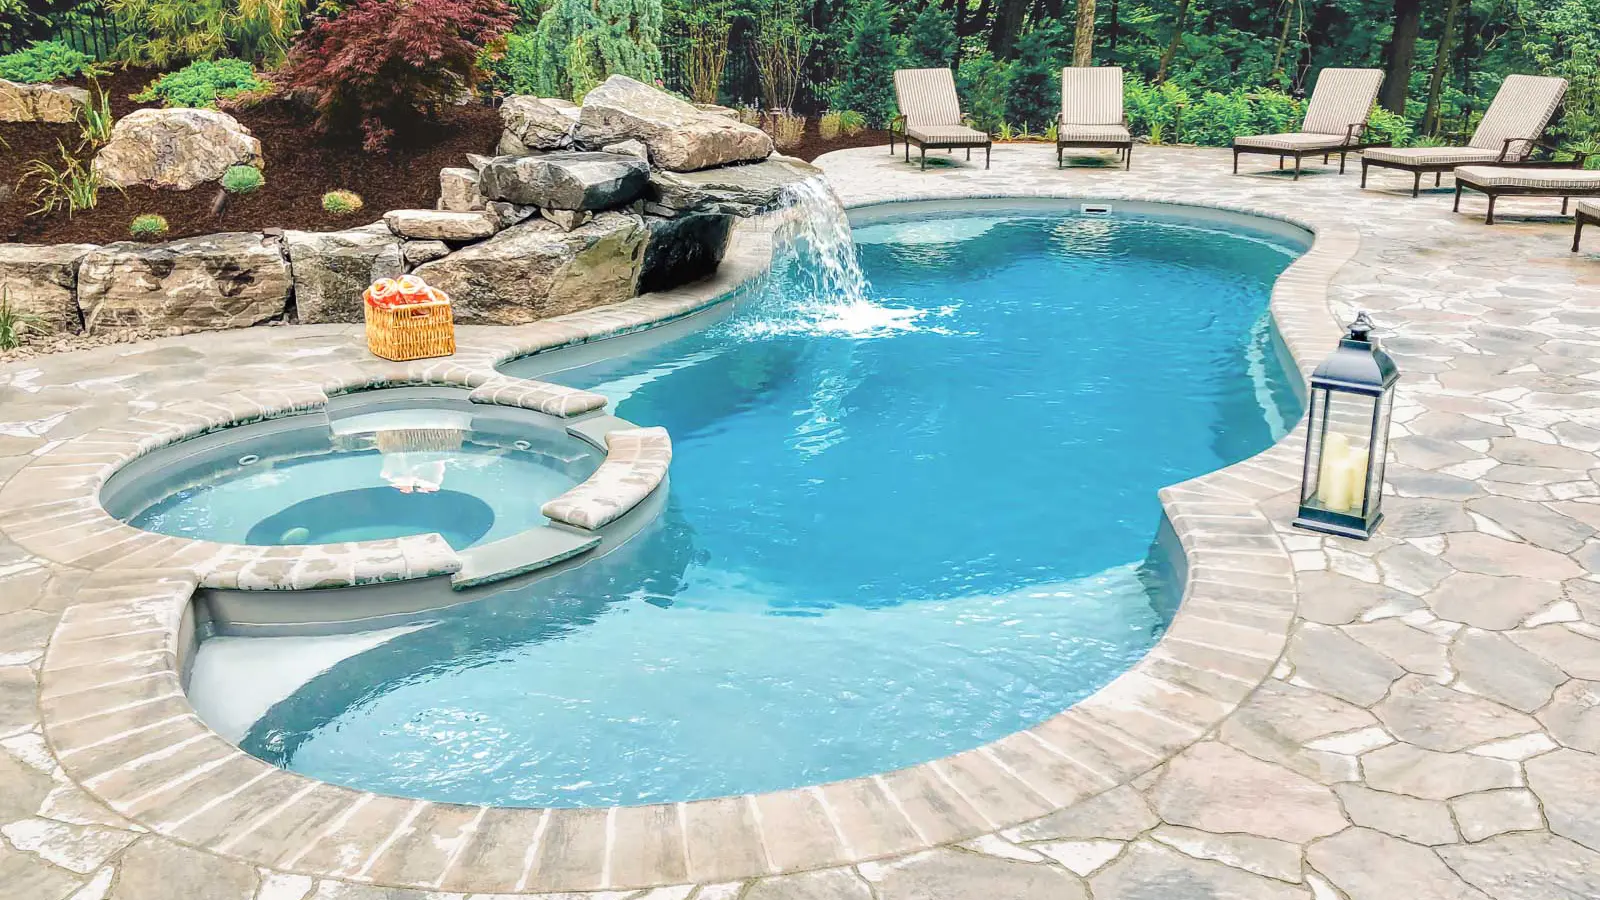 The Allure, a freeform fiberglass pool with a built-in spa in addition to a splash pad